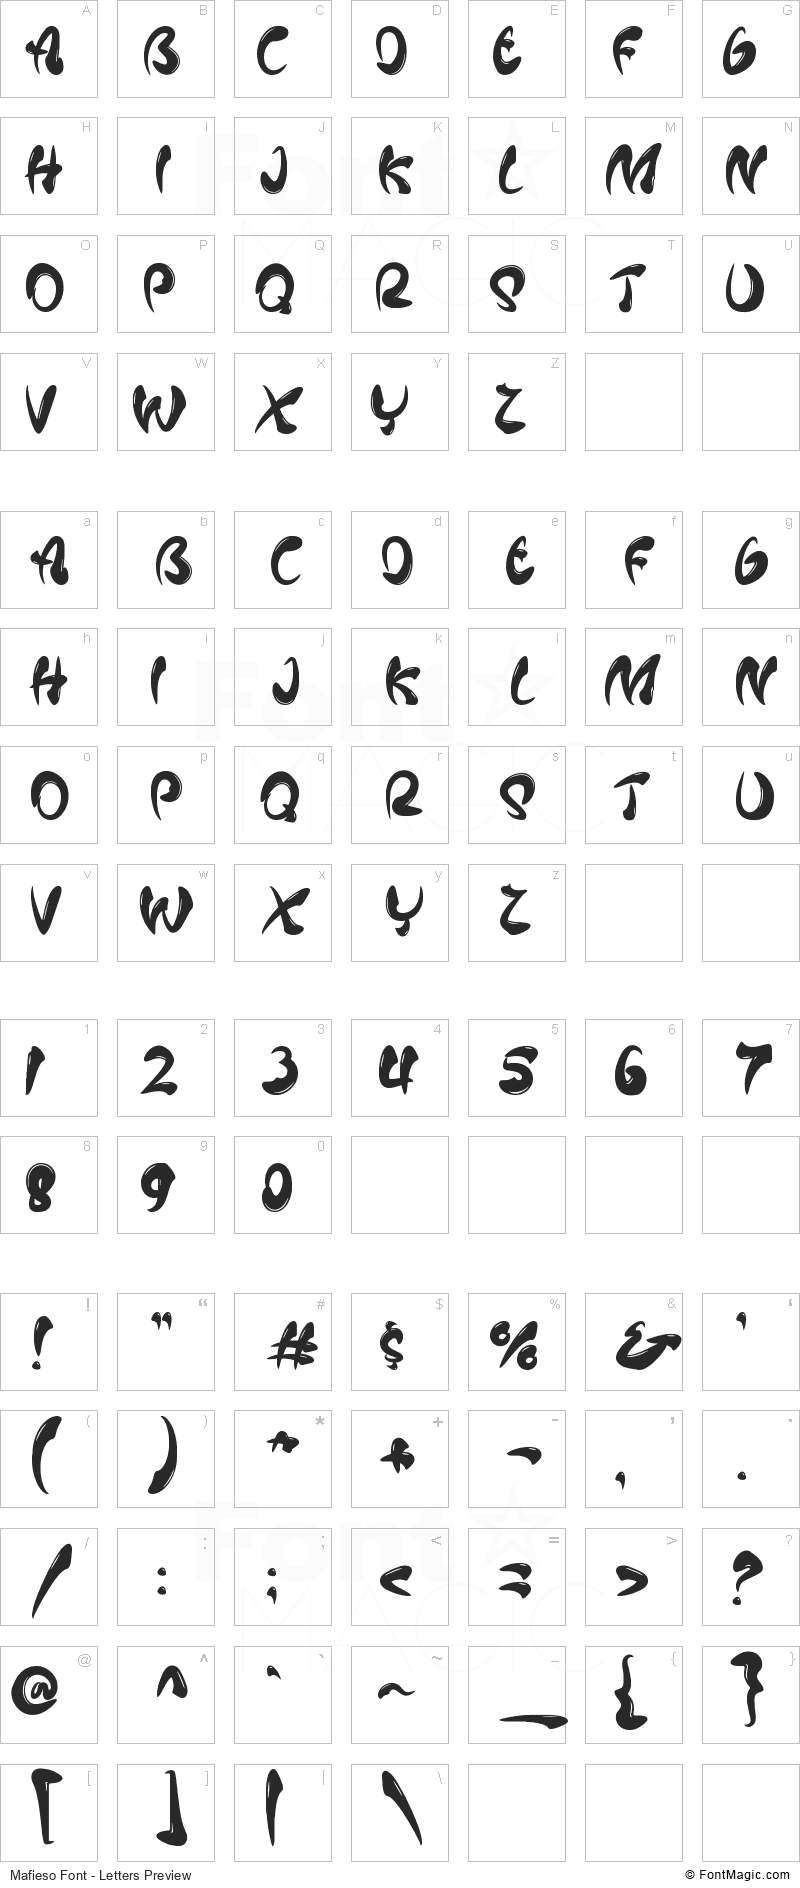 Mafieso Font - All Latters Preview Chart